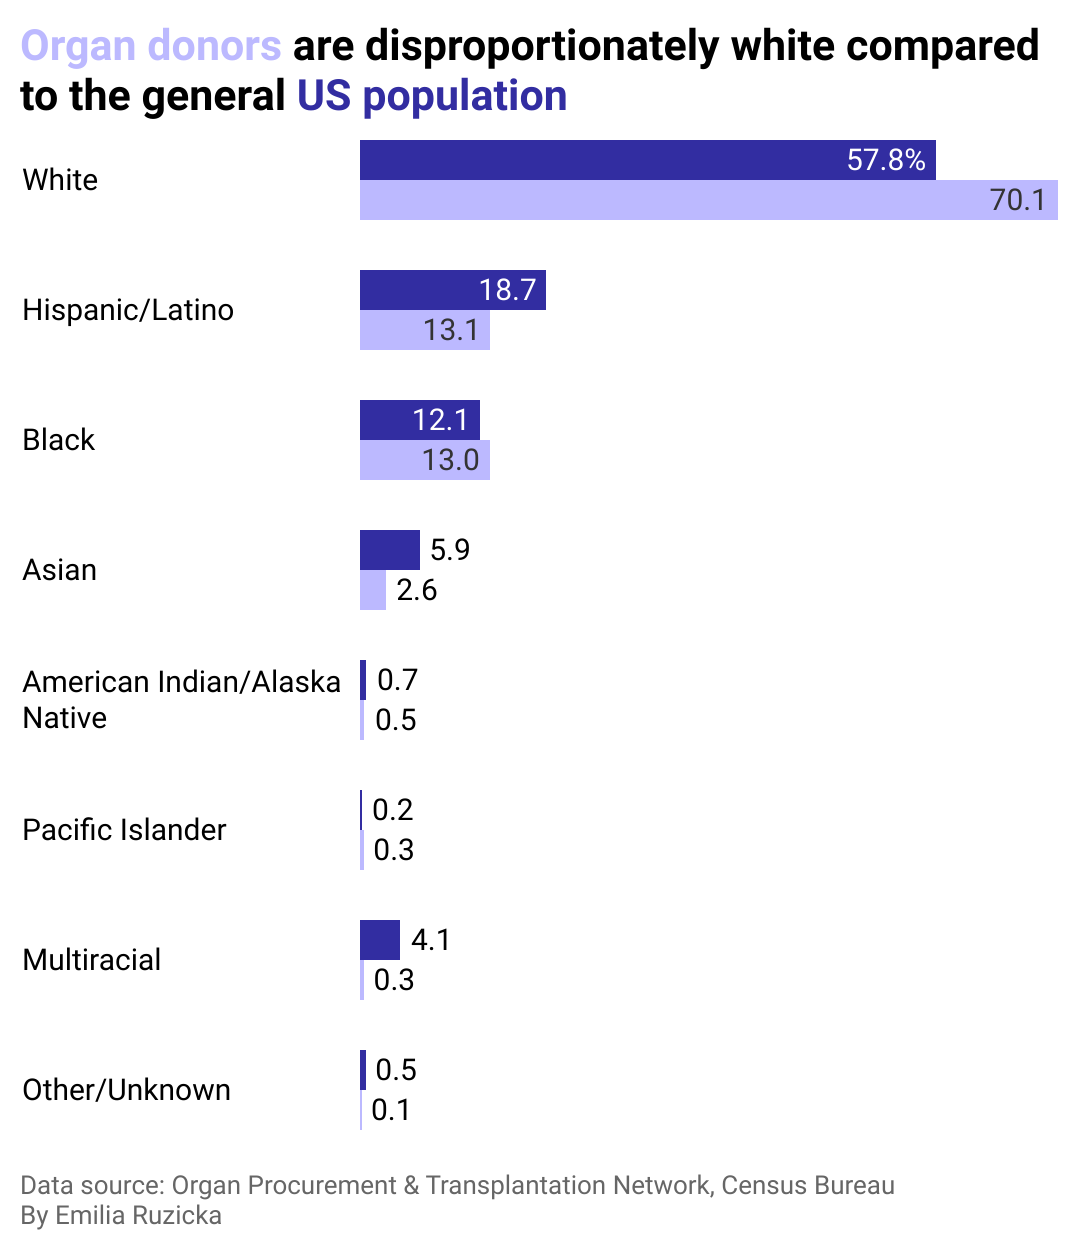 A grouped bar chart showing that organ donors are disproportionately white compared to the U.S. population. About 58% of people in the U.S. are white while about 70% of organ donors are white.